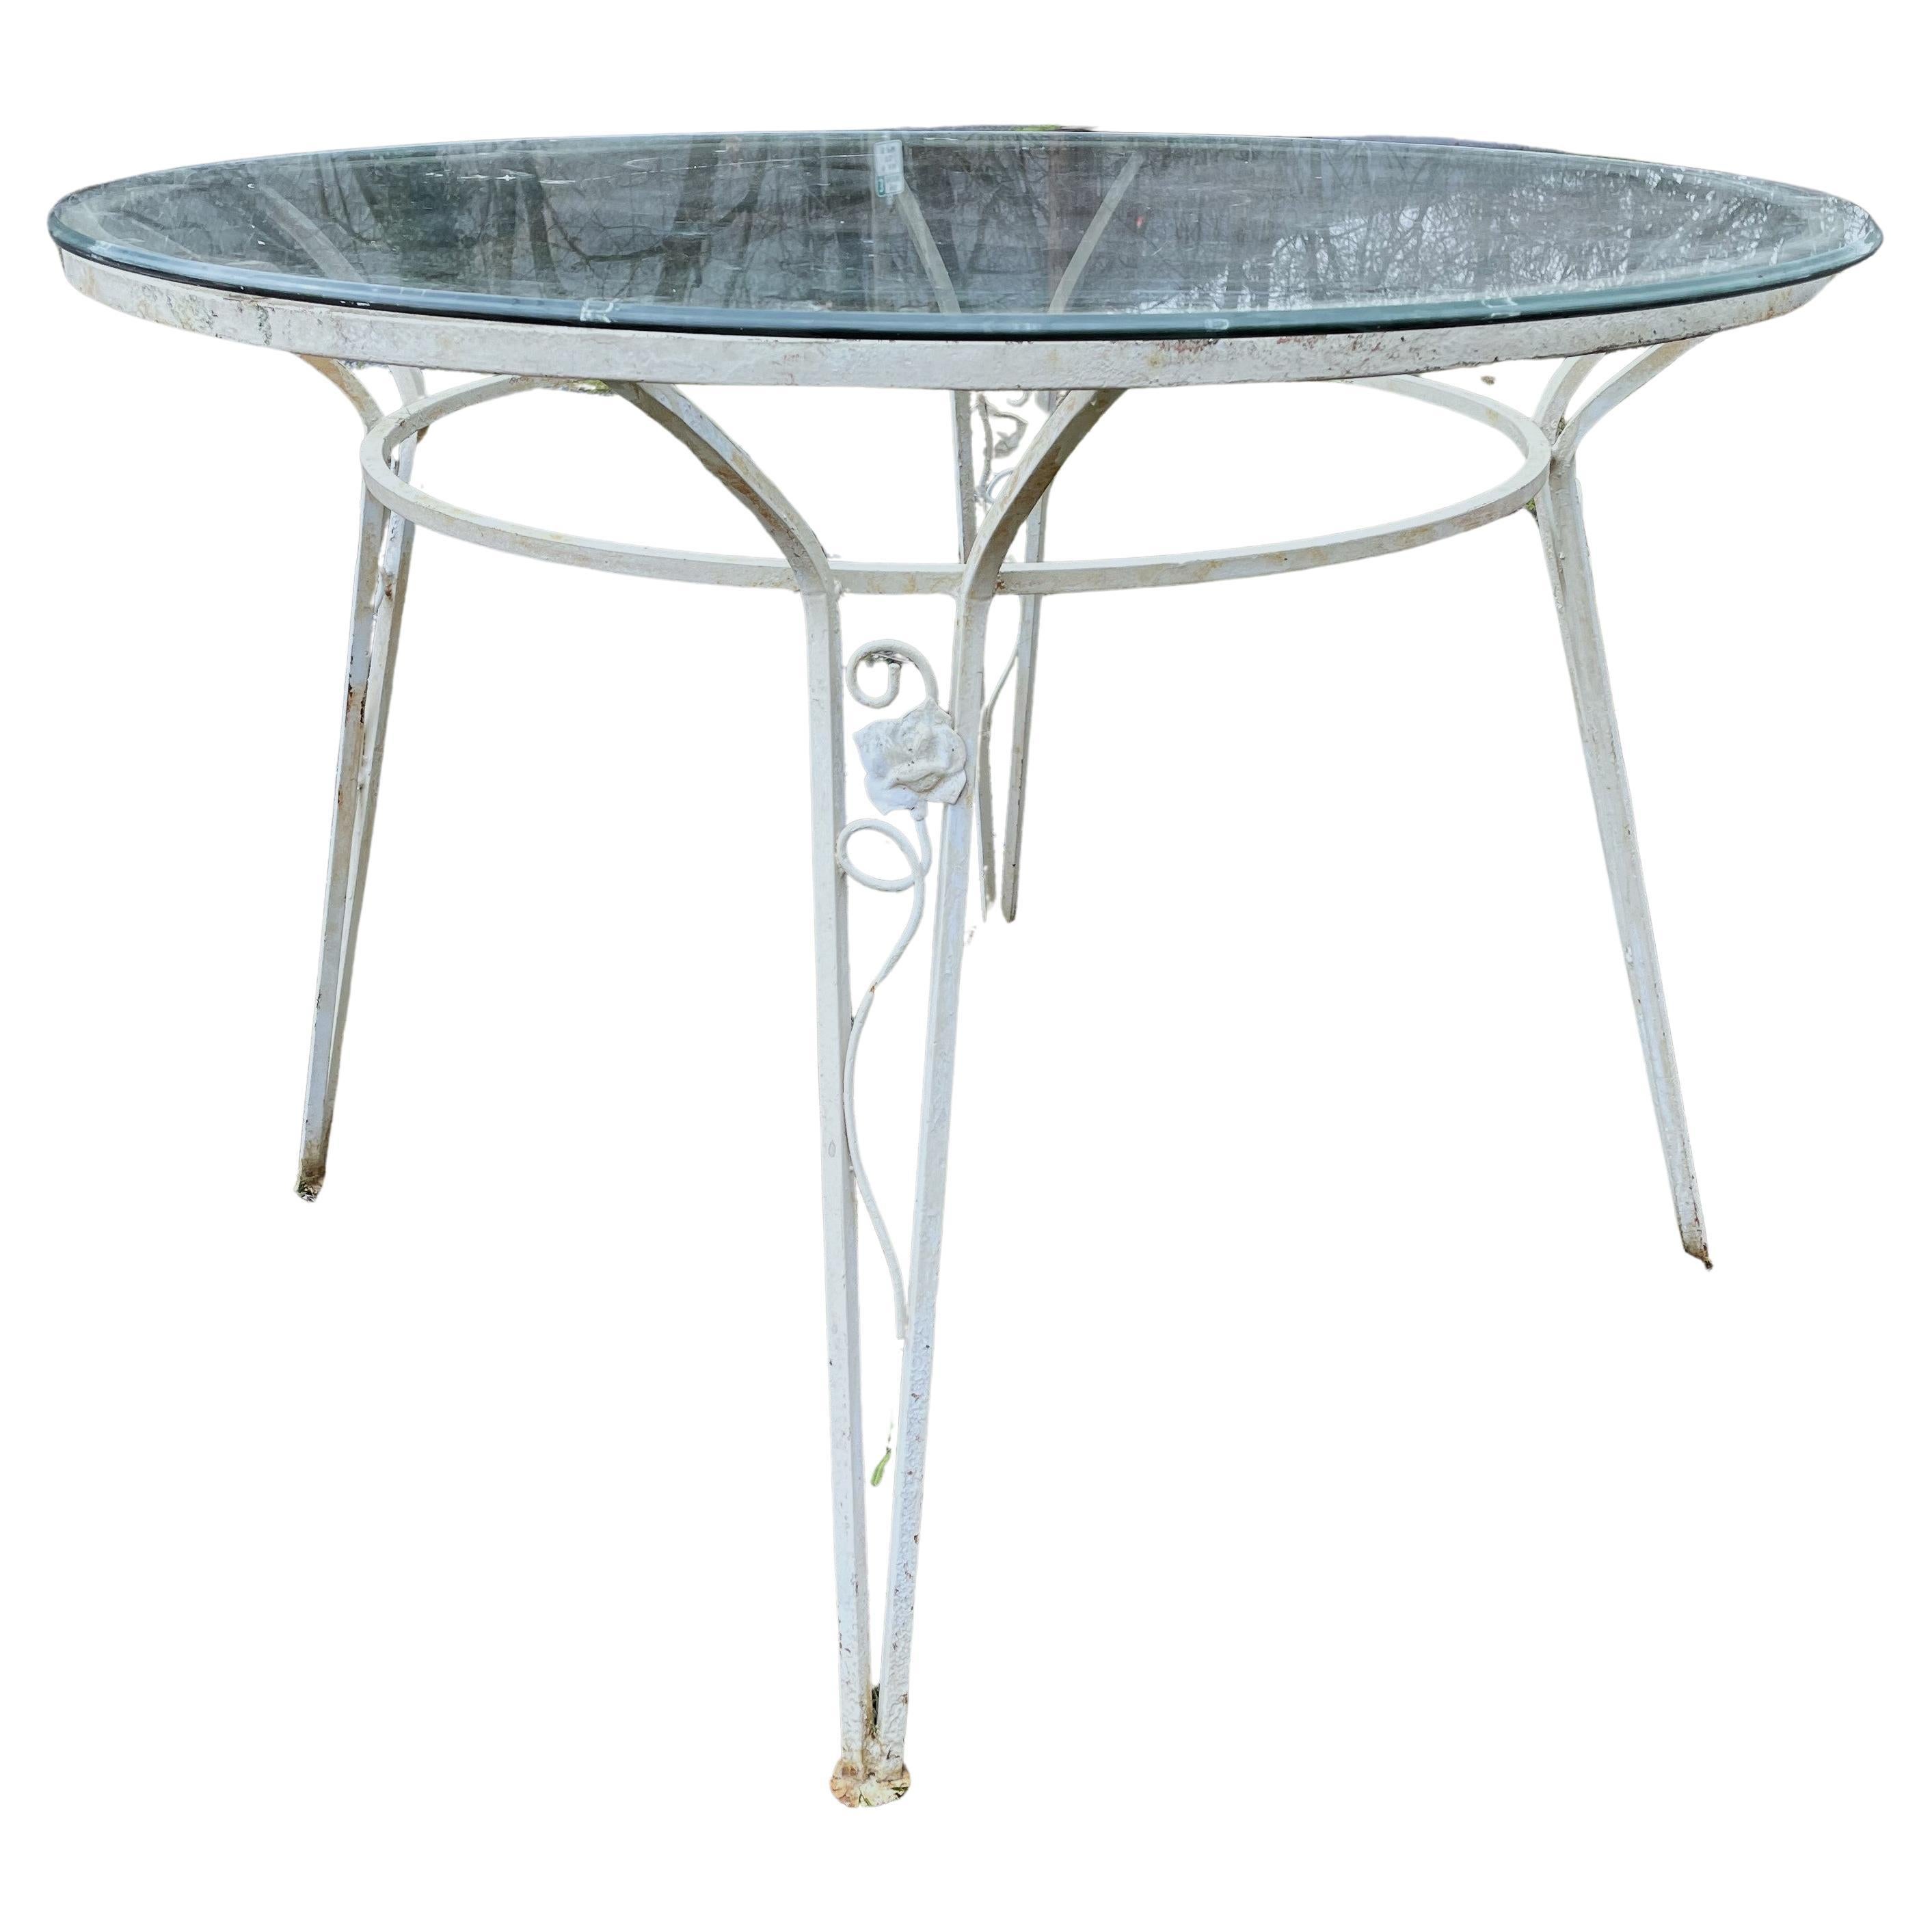 Rose & Vine Pattern Wrought Iron Round Glass Top Dining Table Salterini Style  For Sale